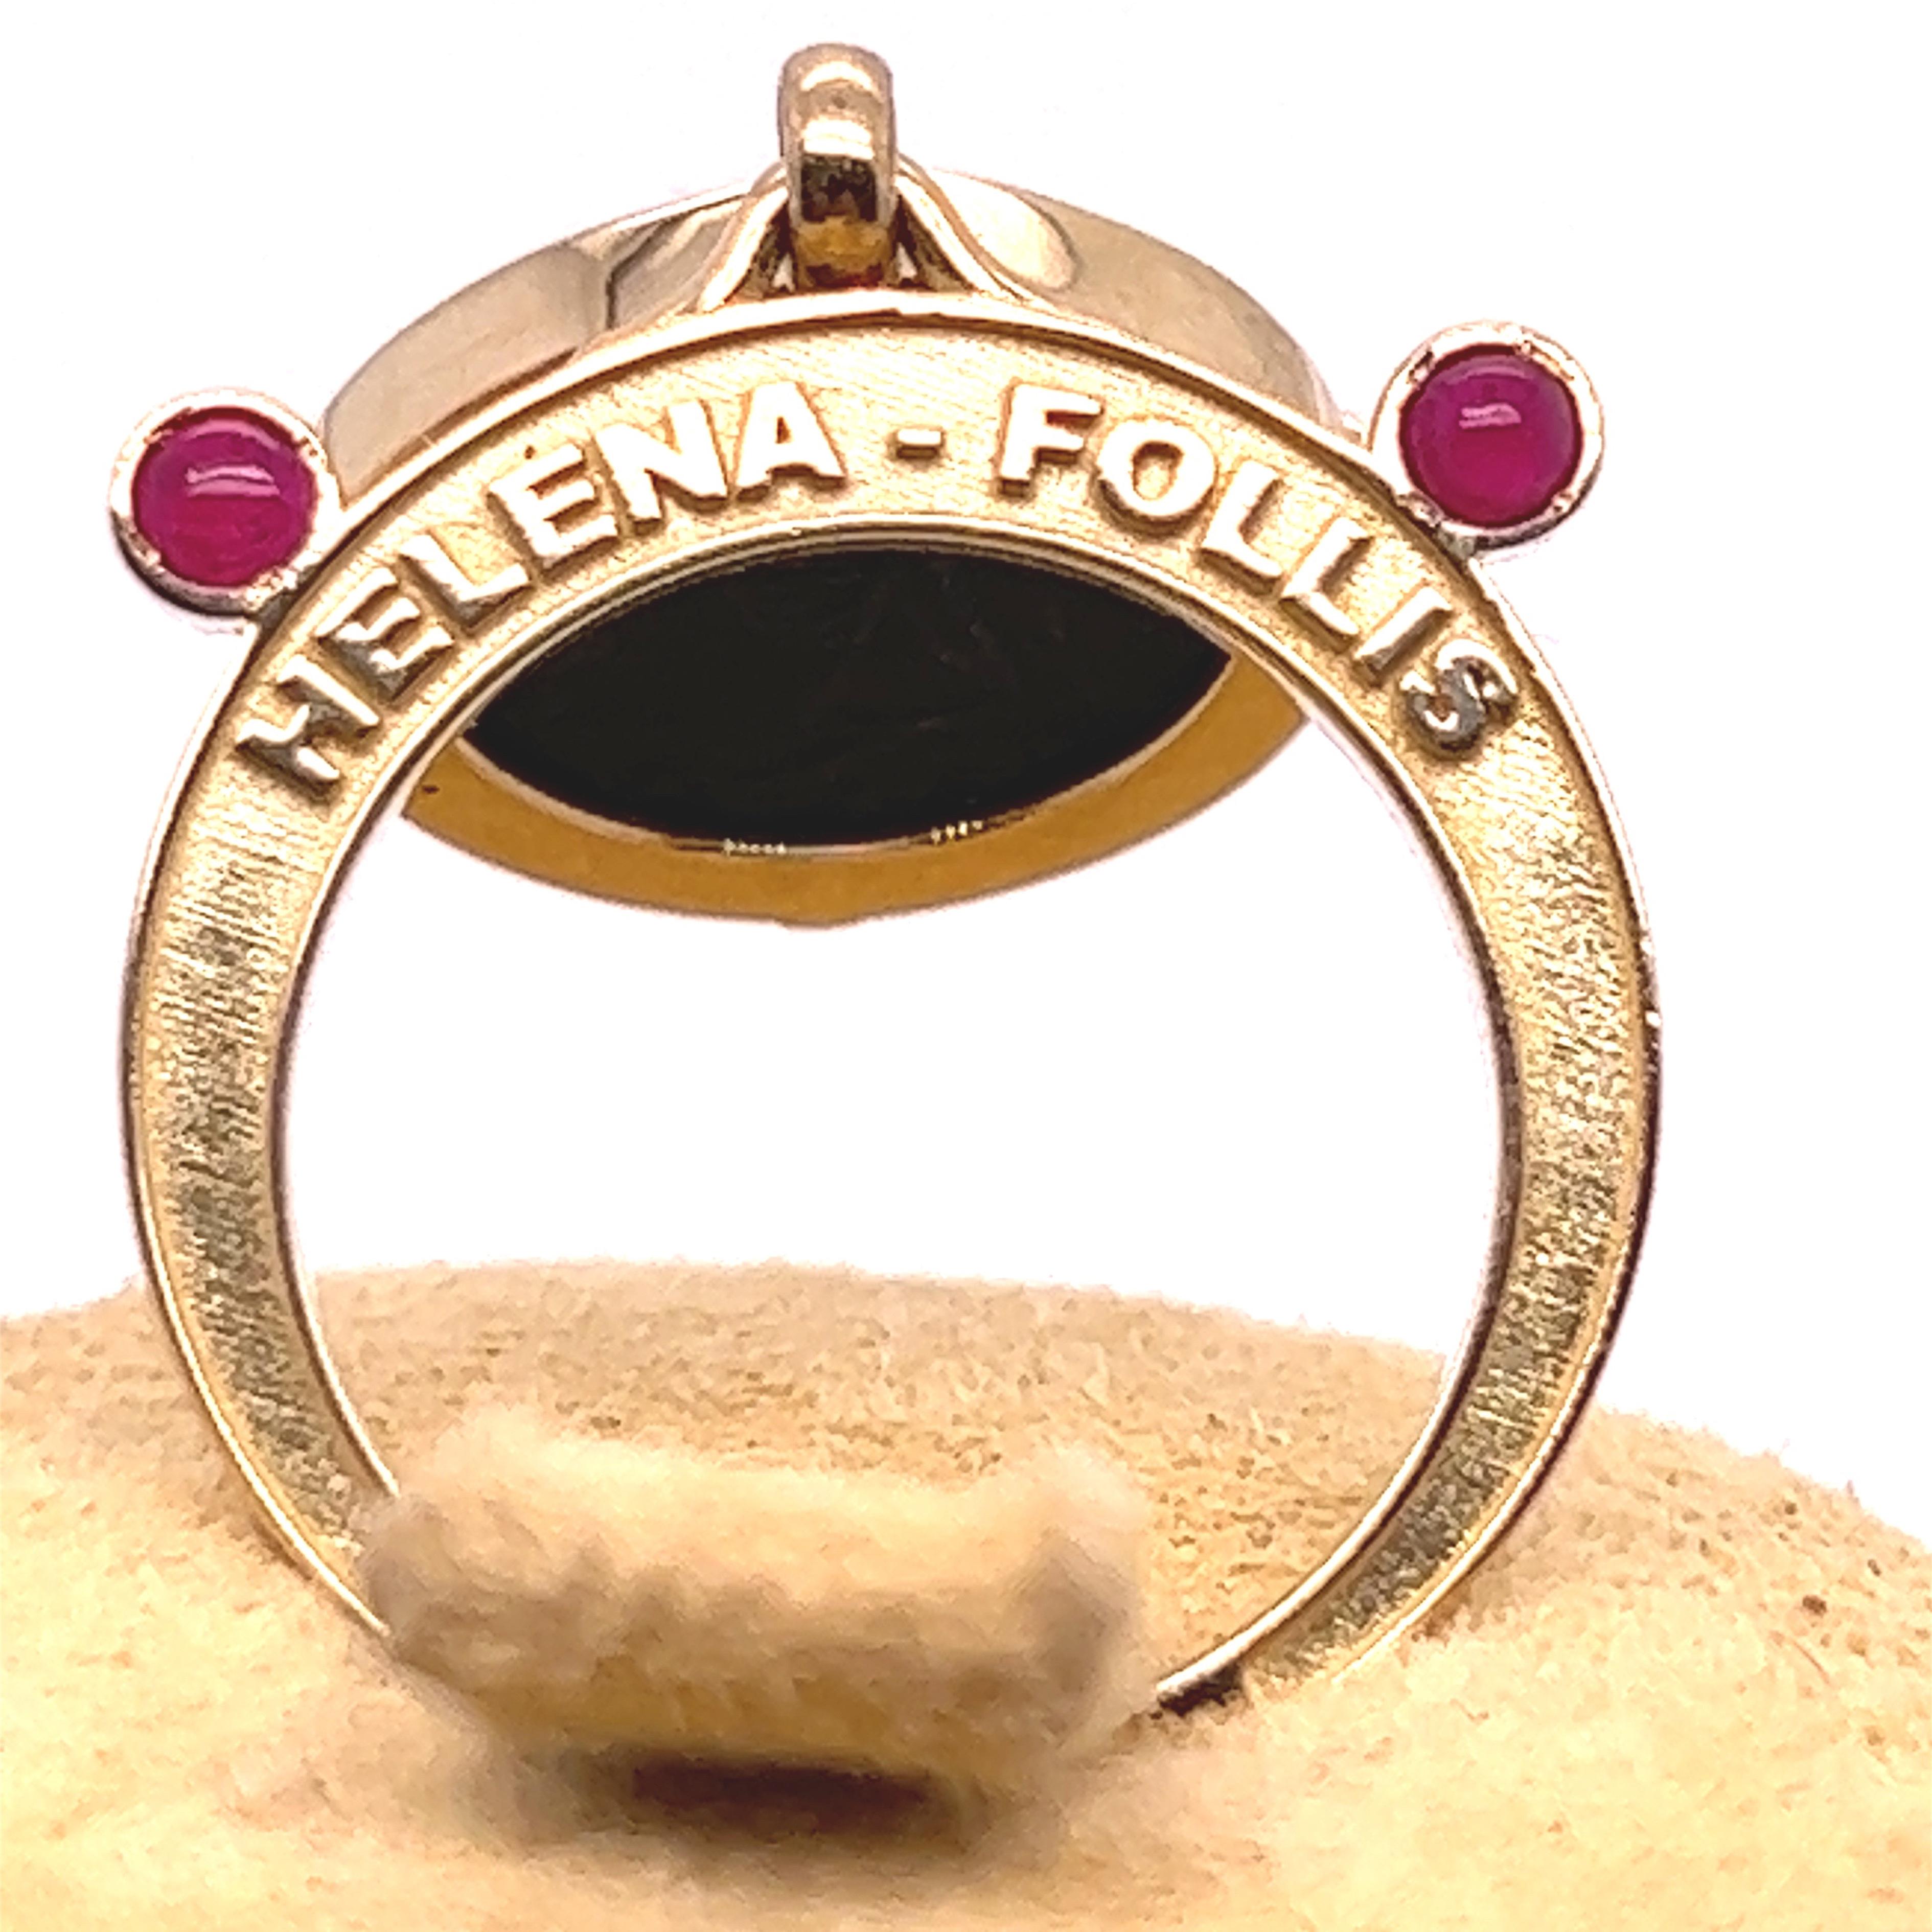 Berca Moruzzi Certified Helena's Head 337 A.D. Coin Ruby 18kt Gold Charm Ring For Sale 2